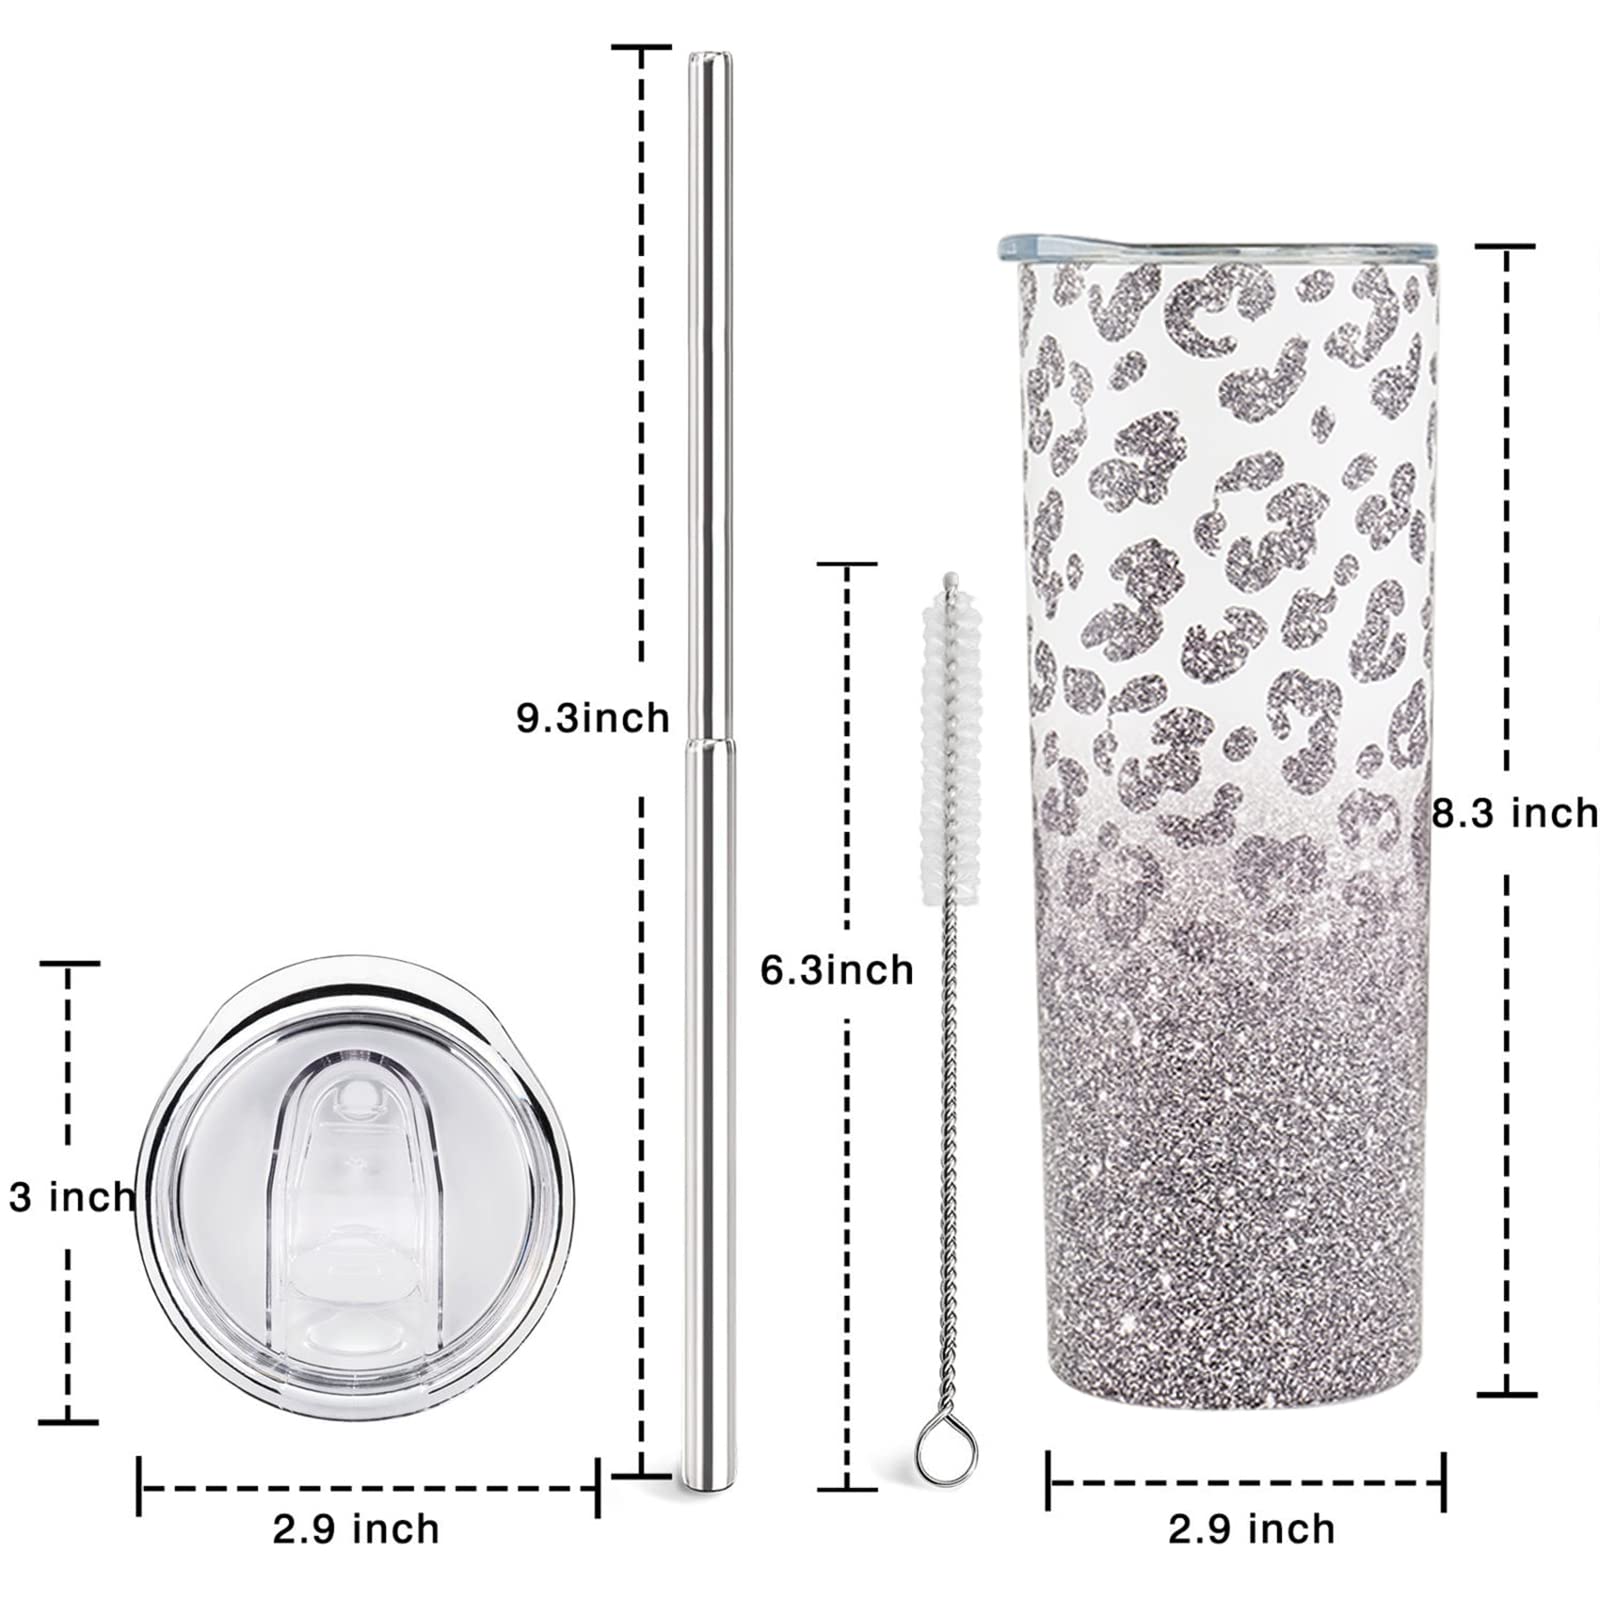 Heqianco Leopard Tumbler With Lid and Straw Cheetah Tumbler Leopard Print Skinny Tumbler Leopard Print Tumbler Cheetah Print Cups Water Bottle Coffee Tumbler Travel Mug Gifts for Women